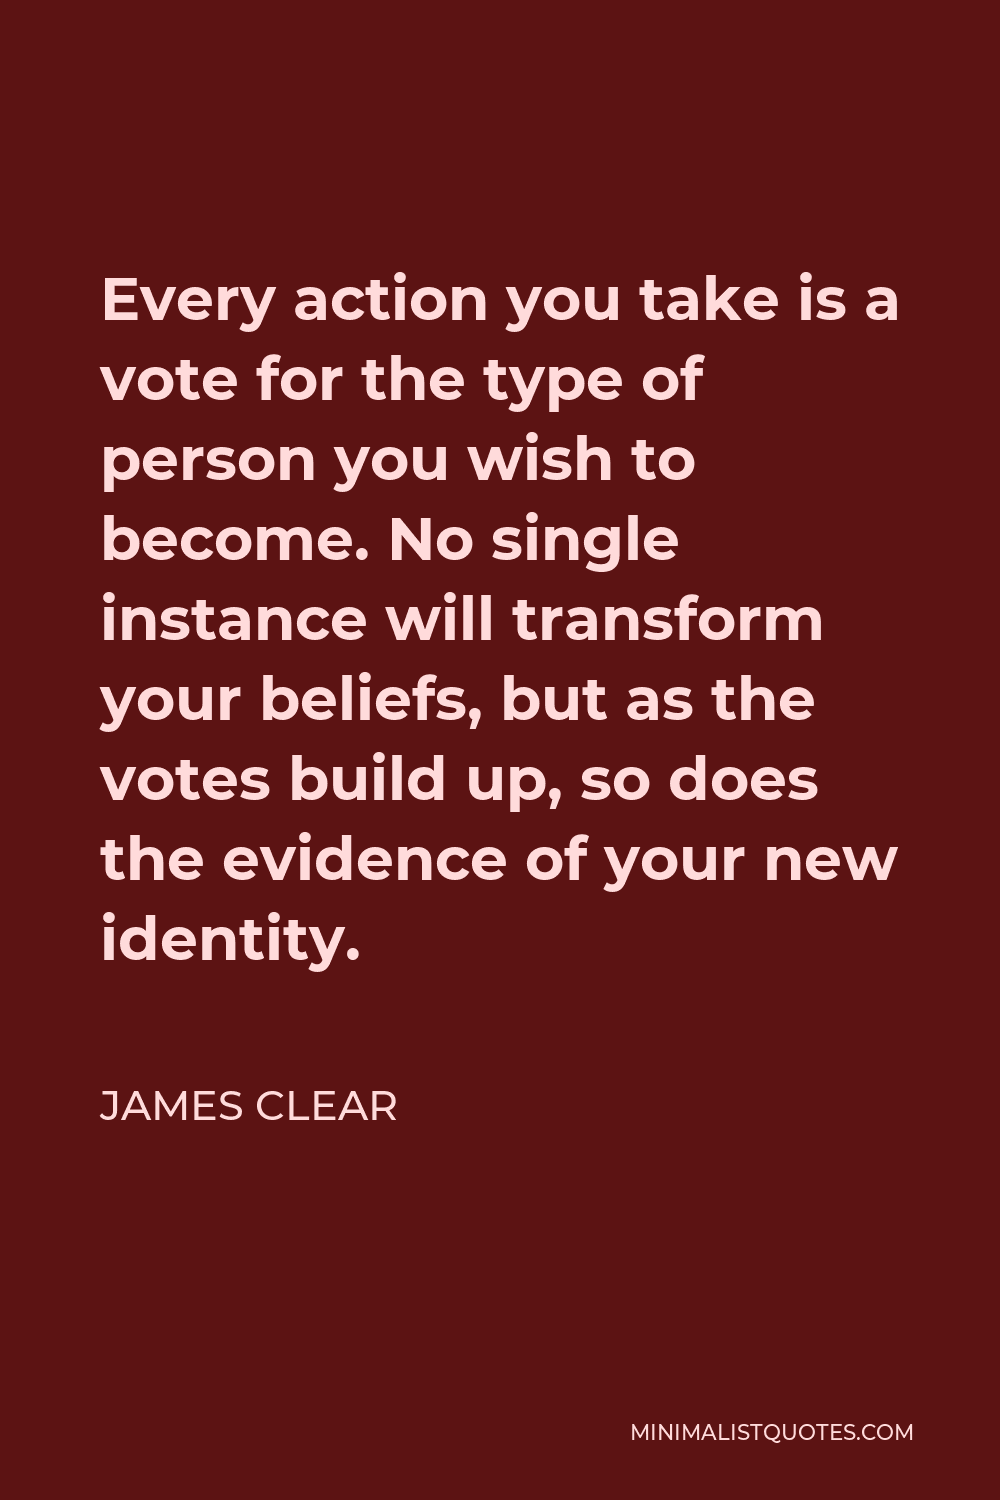 James Clear Quote - Every action you take is a vote for the type of person you wish to become.